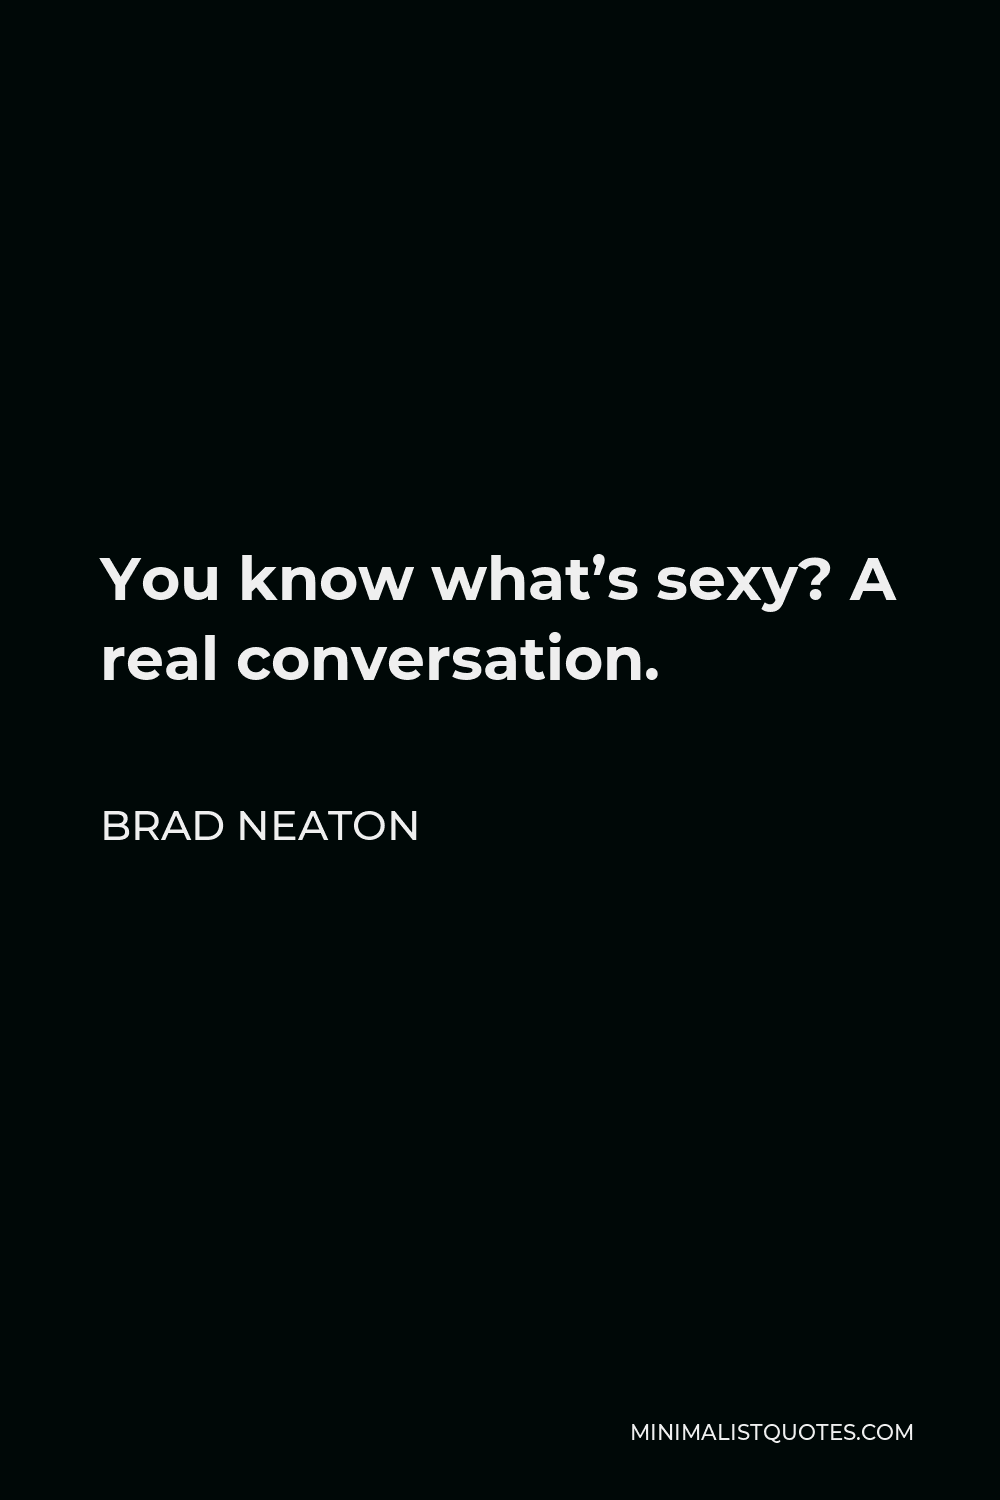 Brad Neaton Quote - You know what’s sexy? A real conversation.